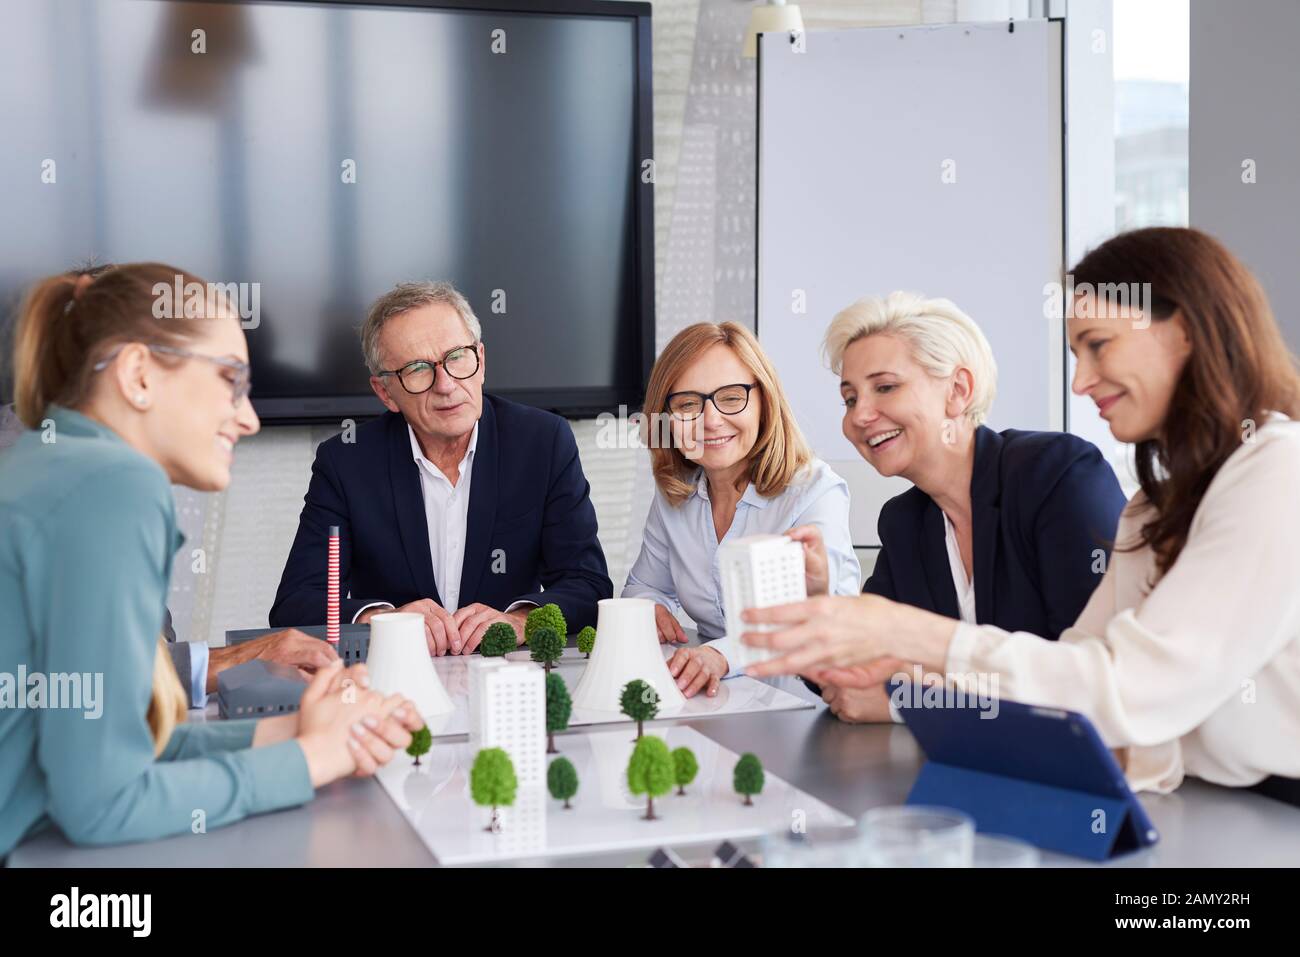 Business talks at conference table Stock Photo